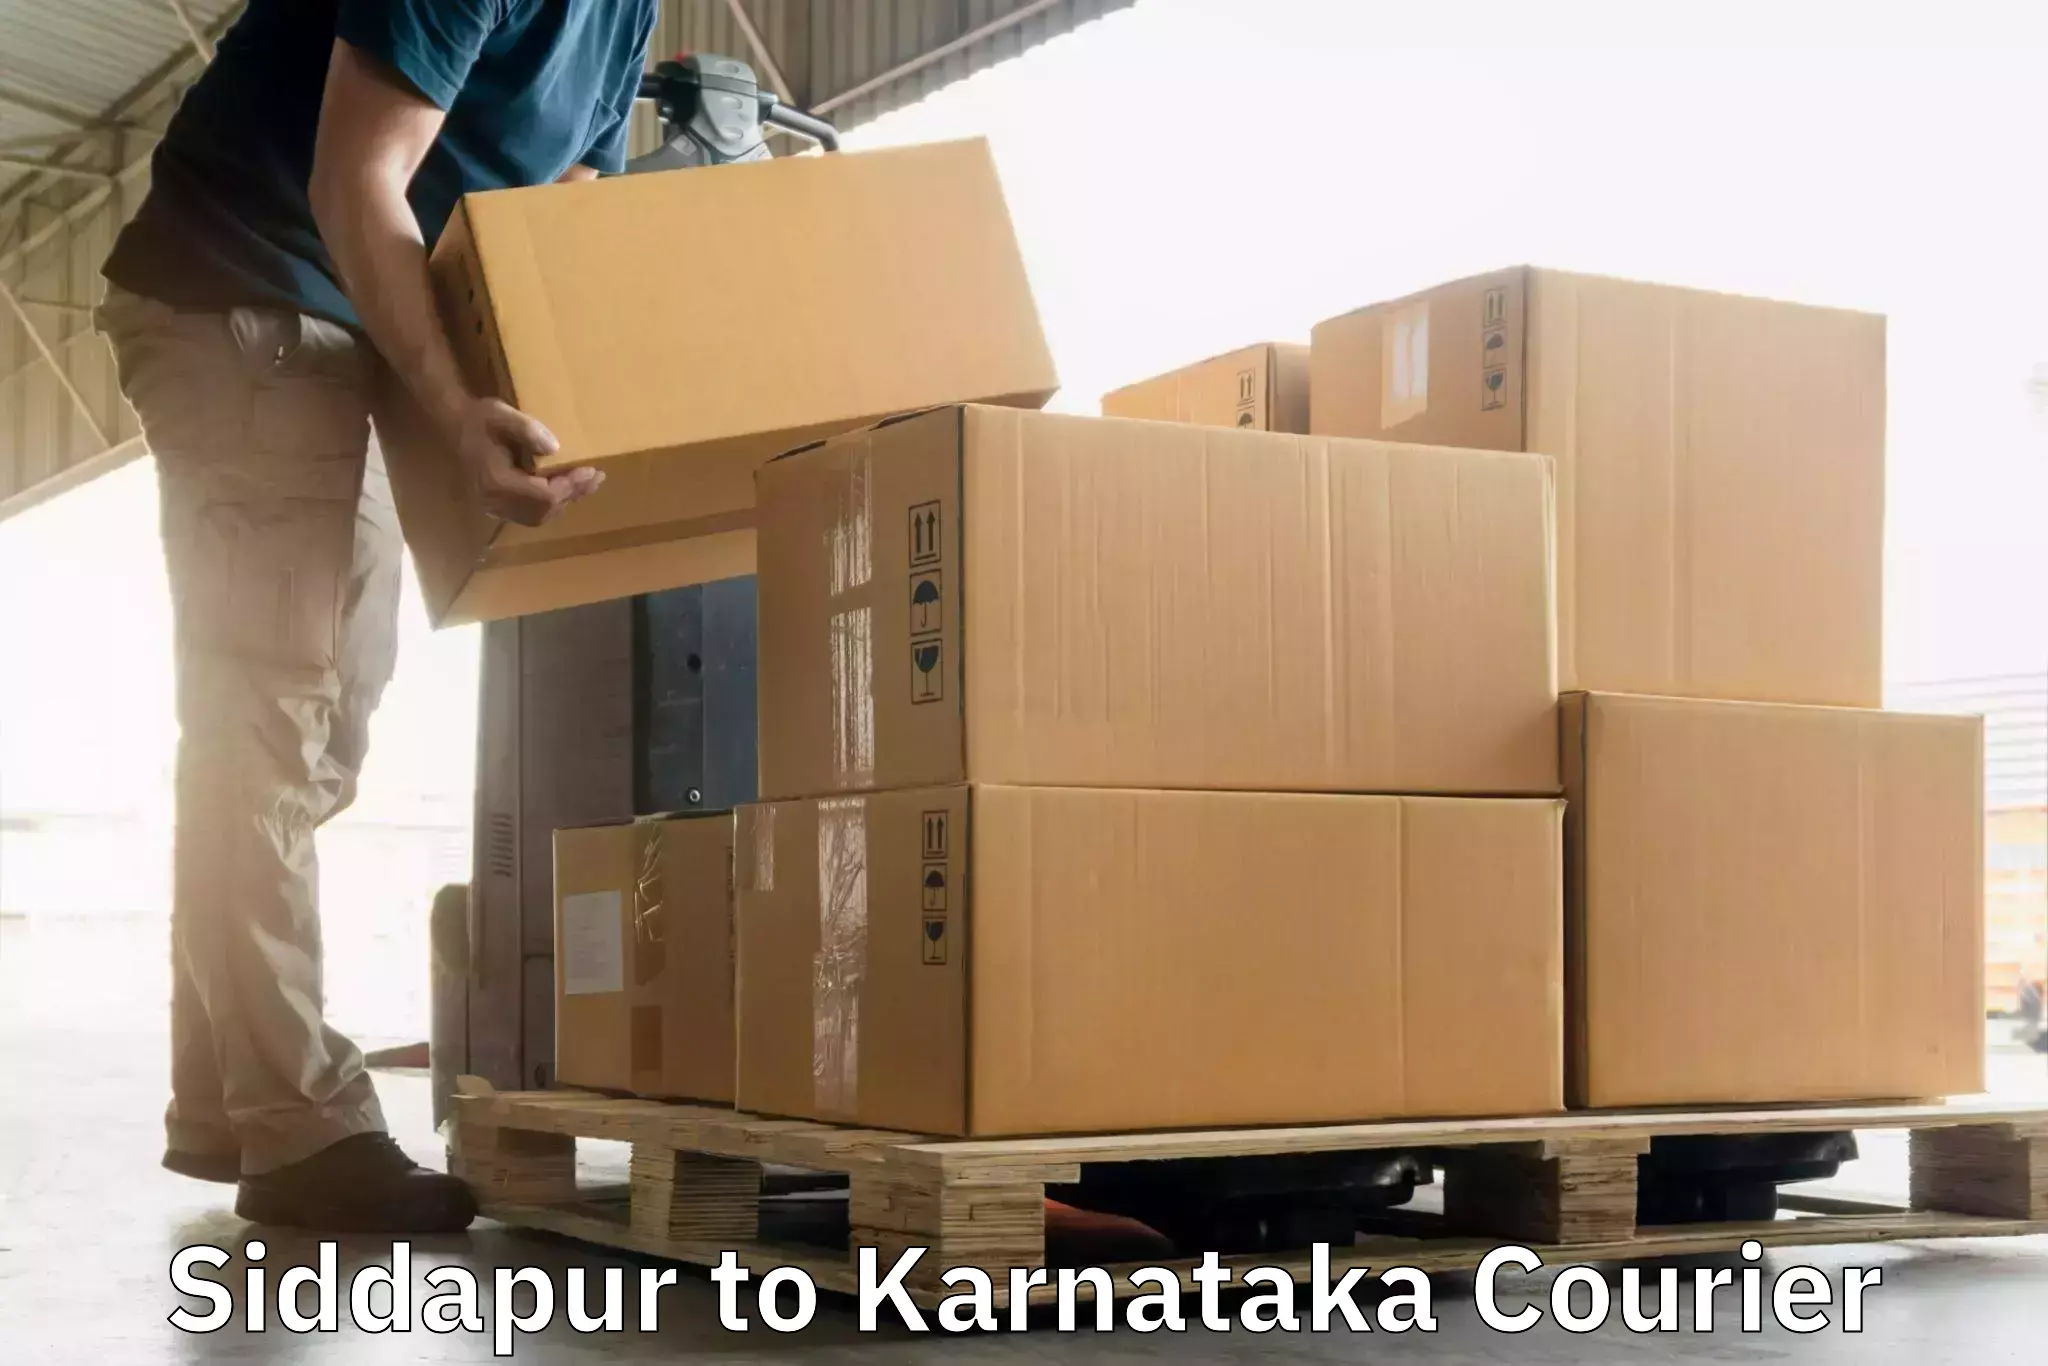 Doorstep delivery service Siddapur to Bhatkal